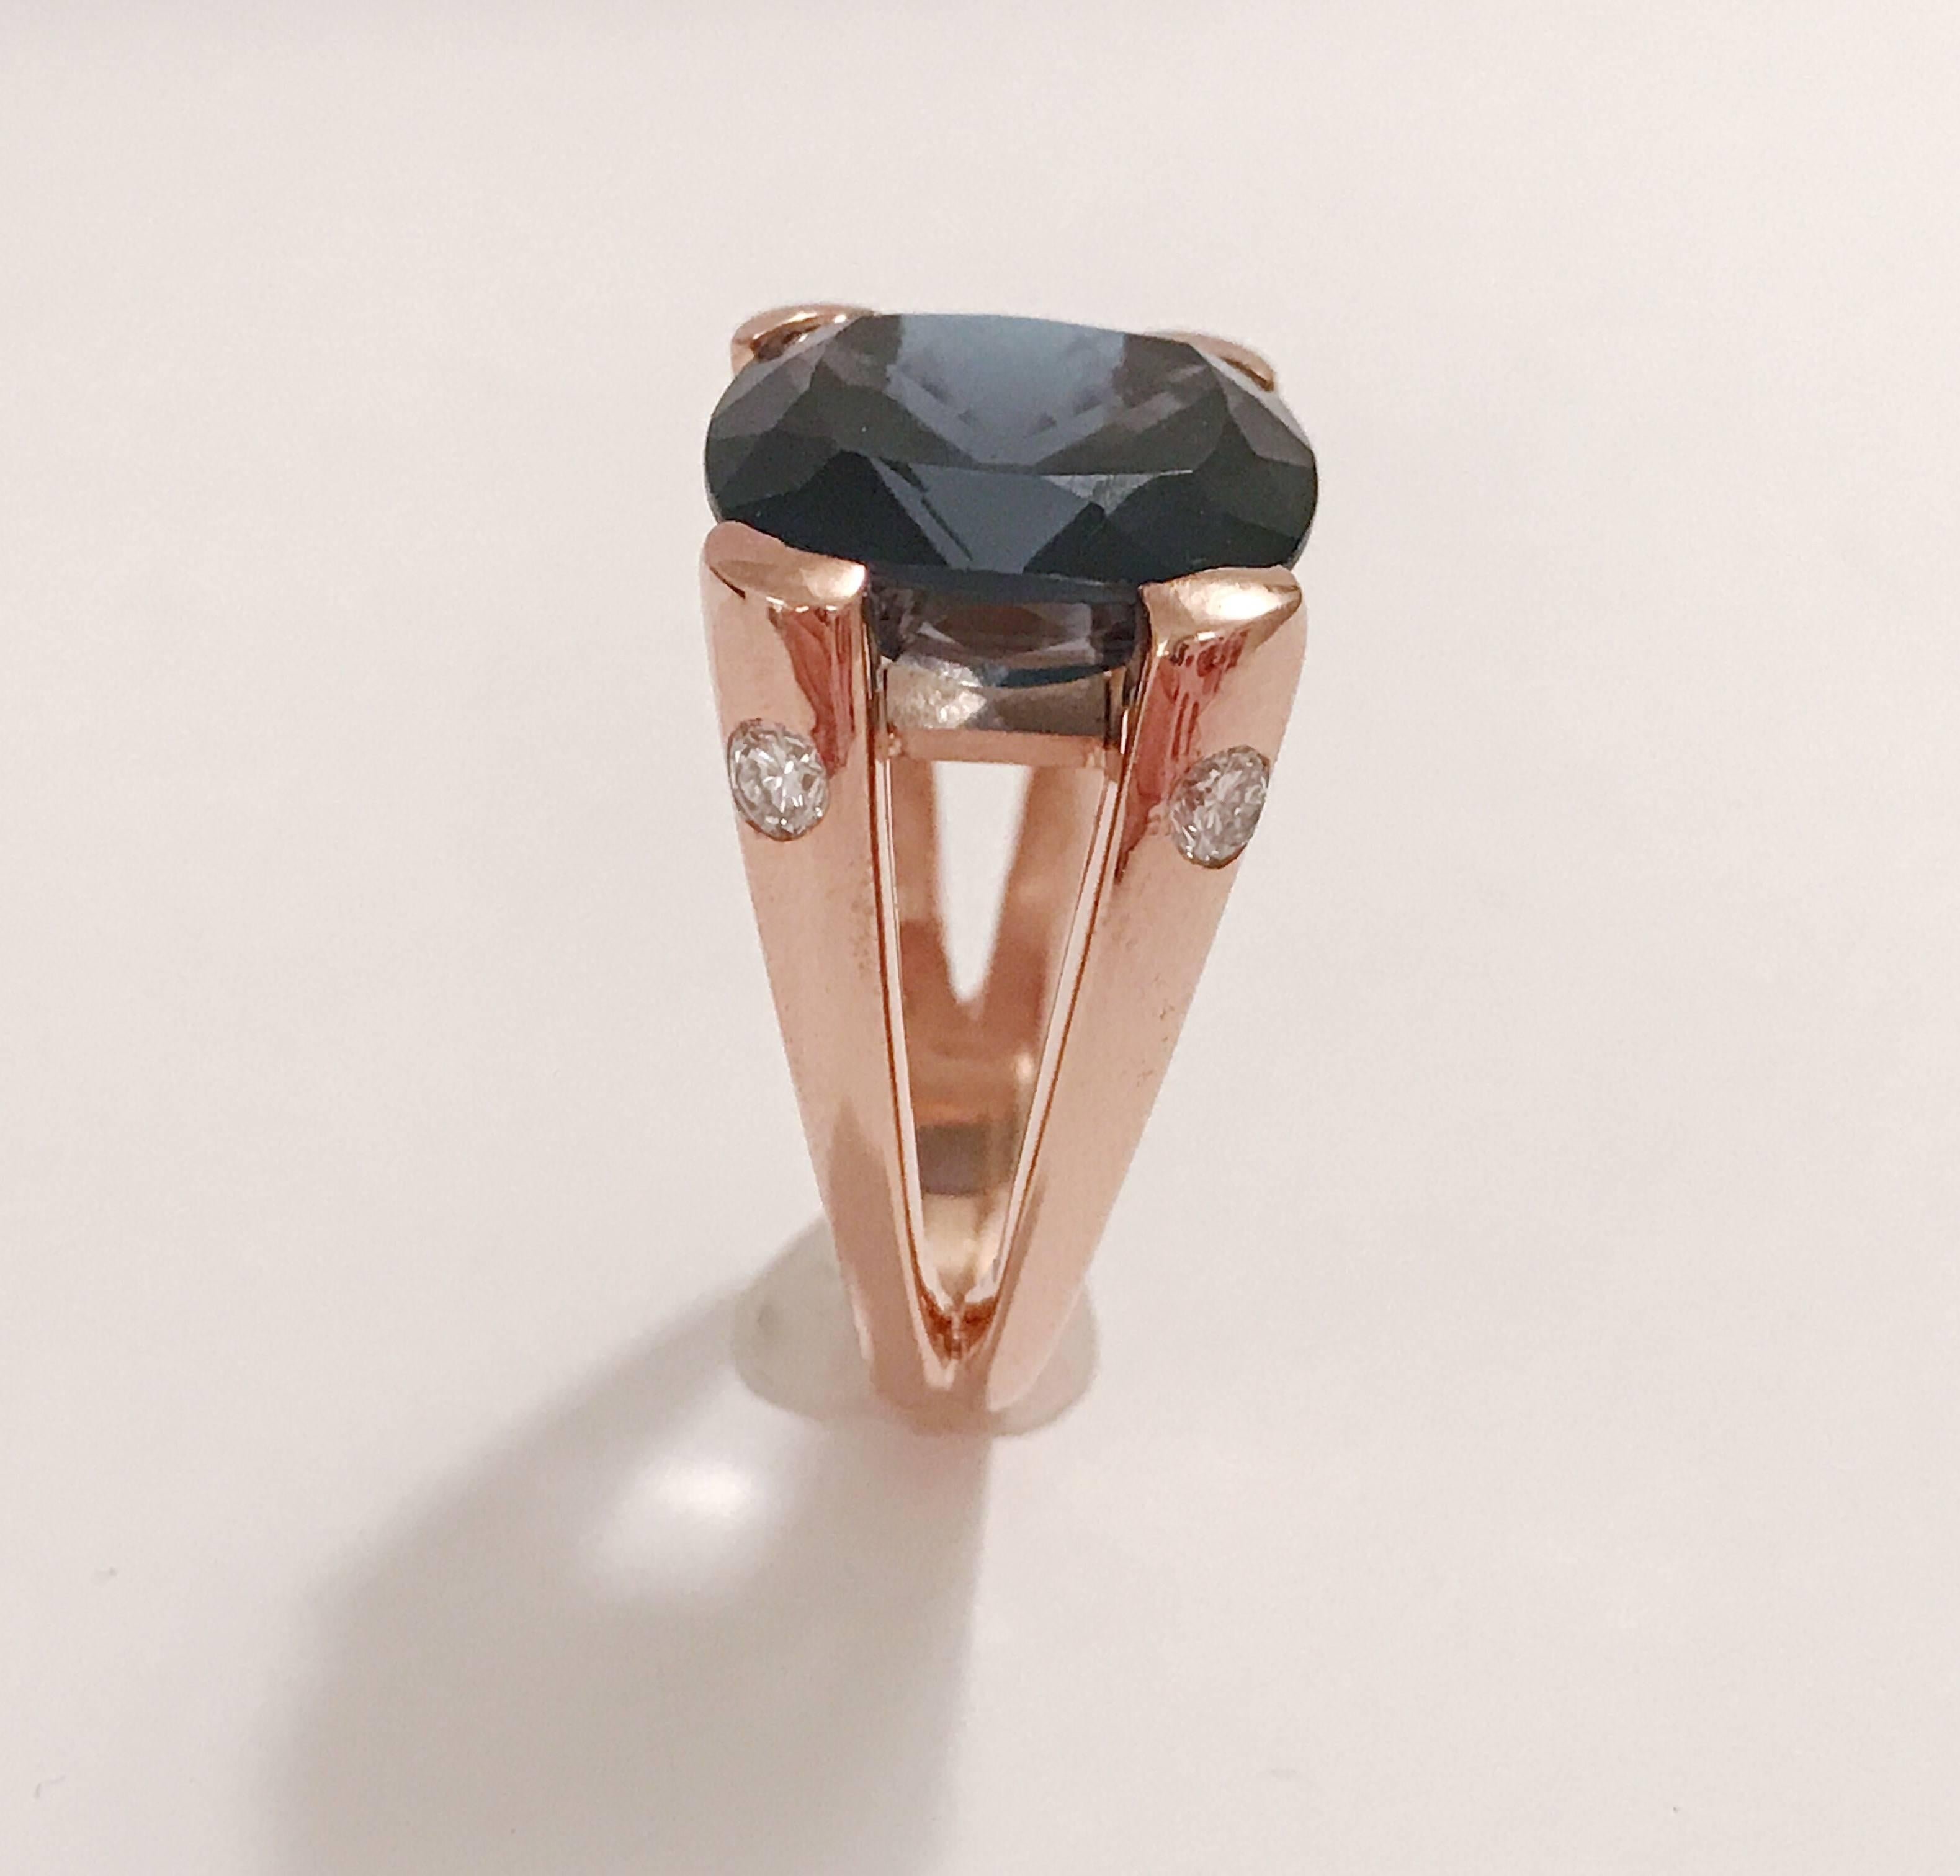 18kt Rose Gold split shank Cushion Ring with 15 mm London Blue Topaz (approximately 25 cts)  and four faceted Diamonds on the side (approximately 0.40 cts).

The elegant split shank add femininity to the boldness of the ring.

This ring can be made